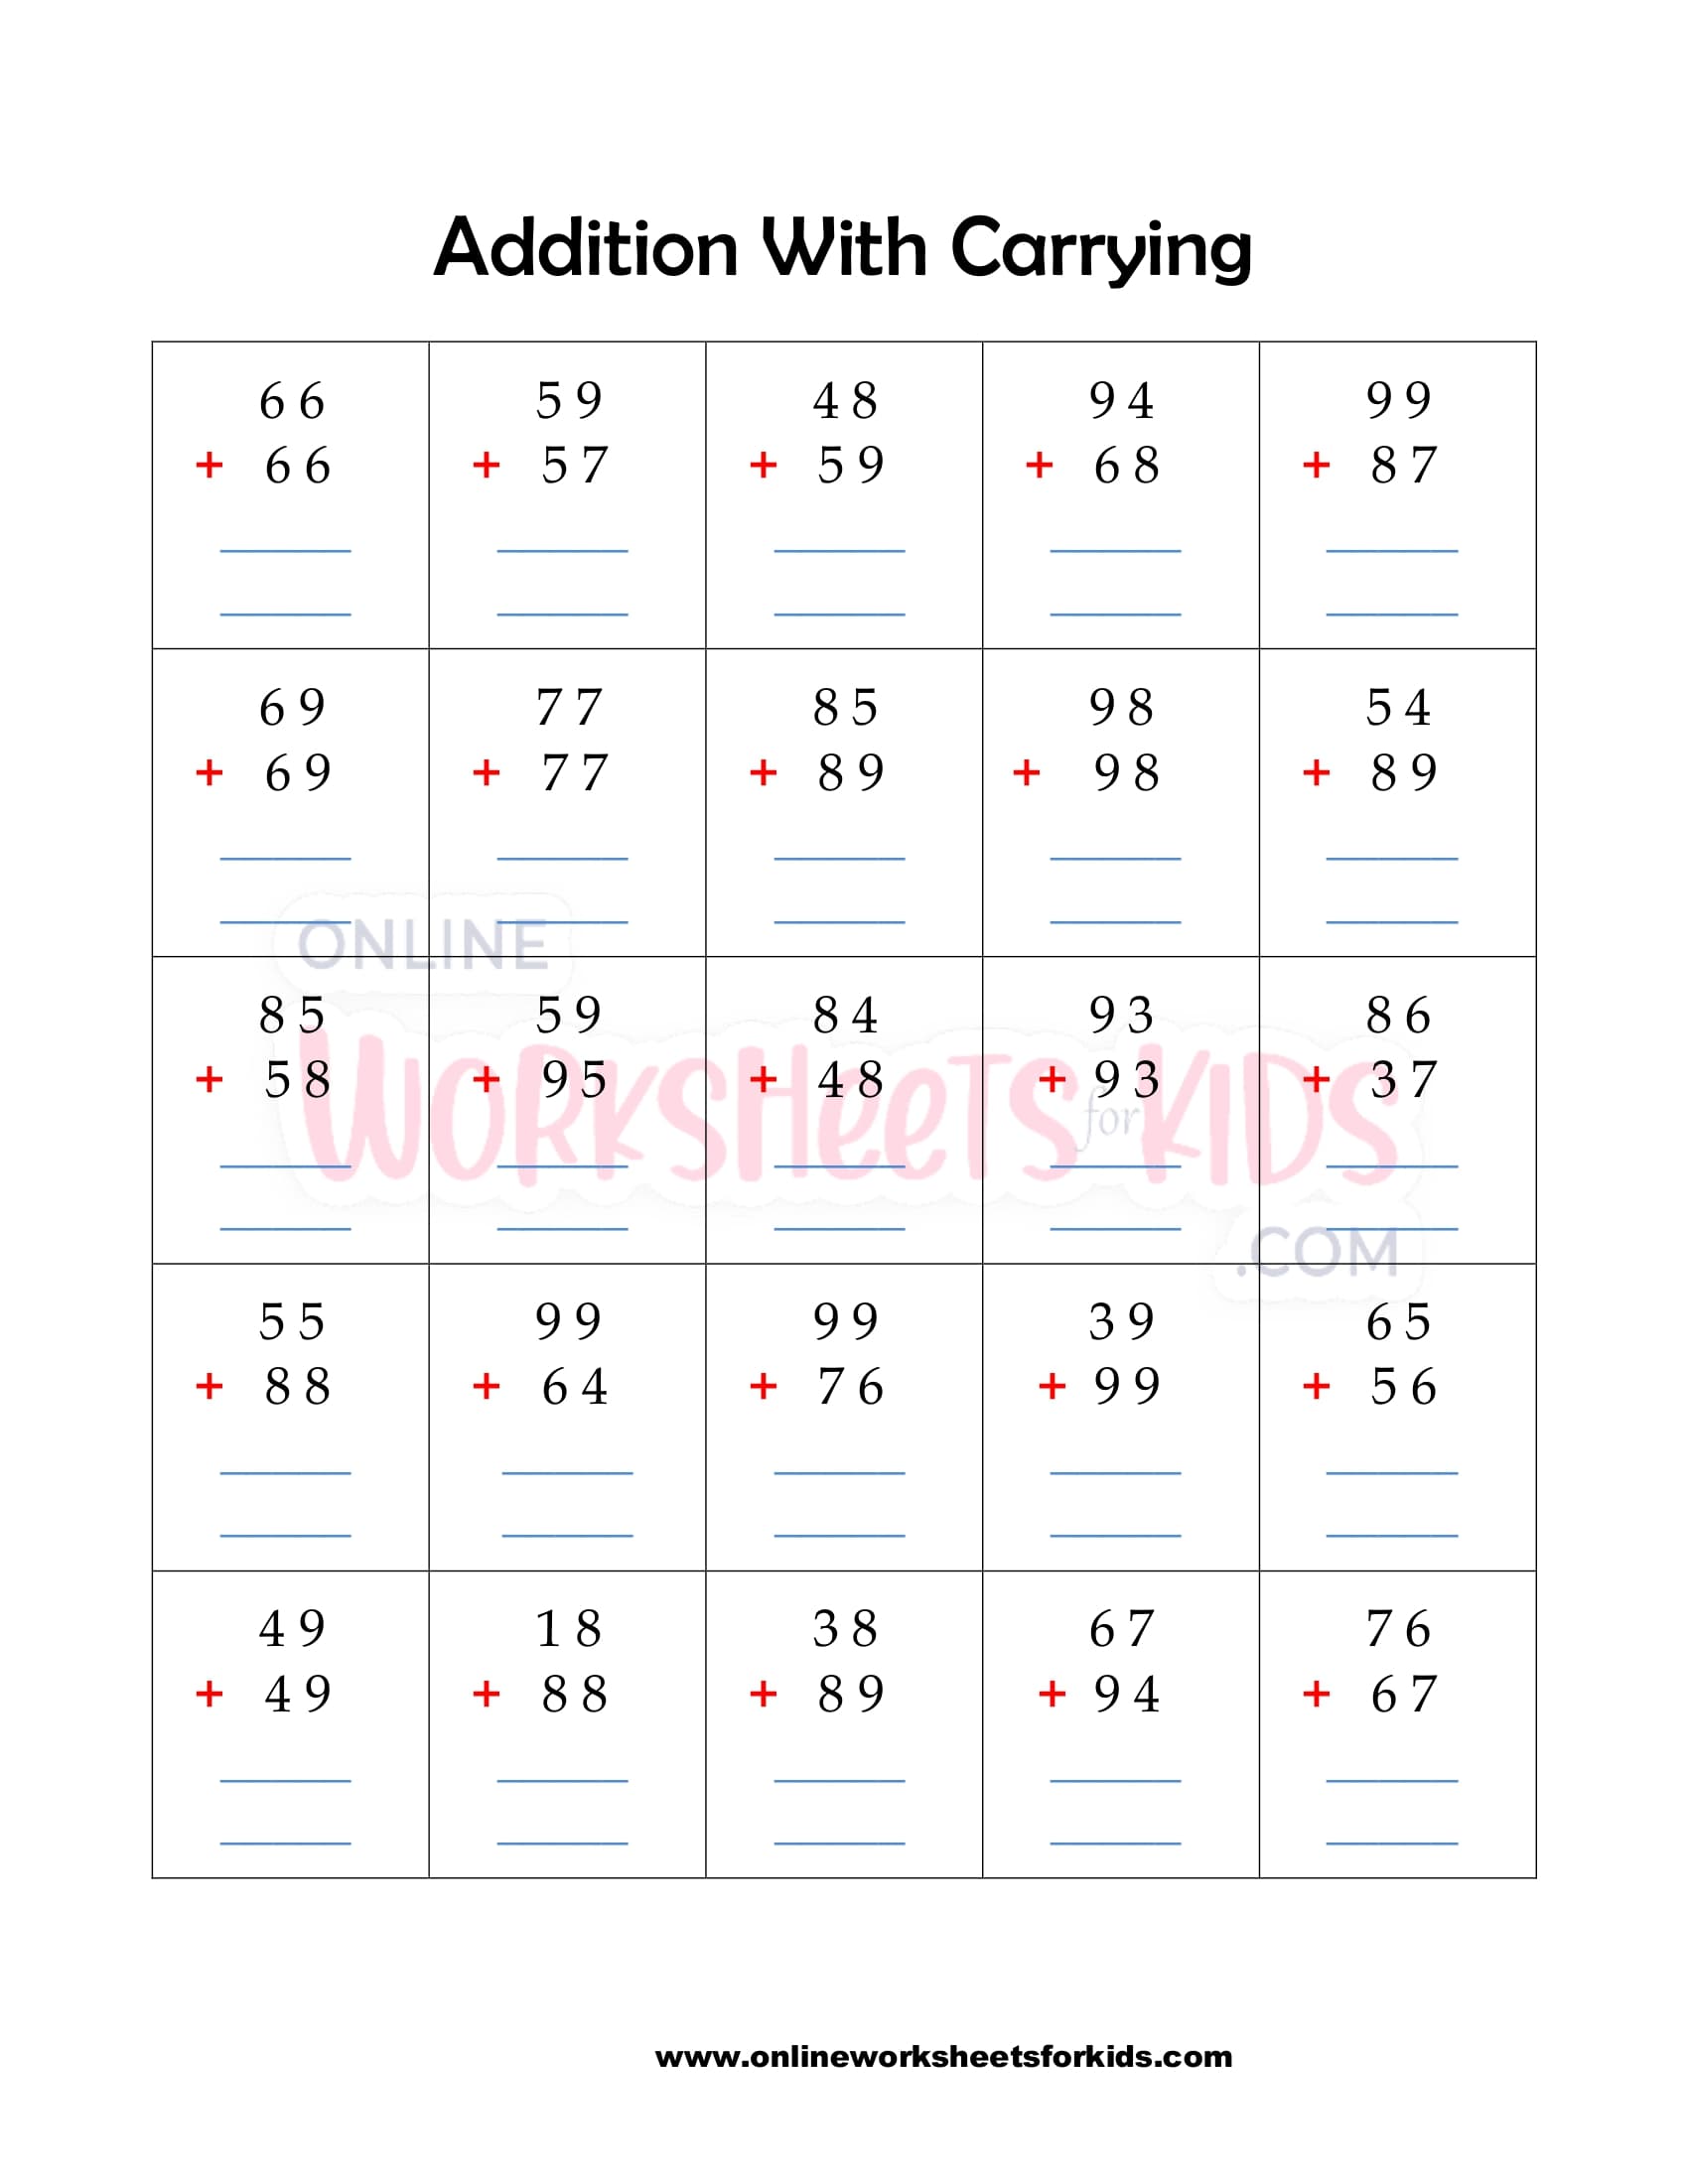 addition-with-carrying-worksheets-2